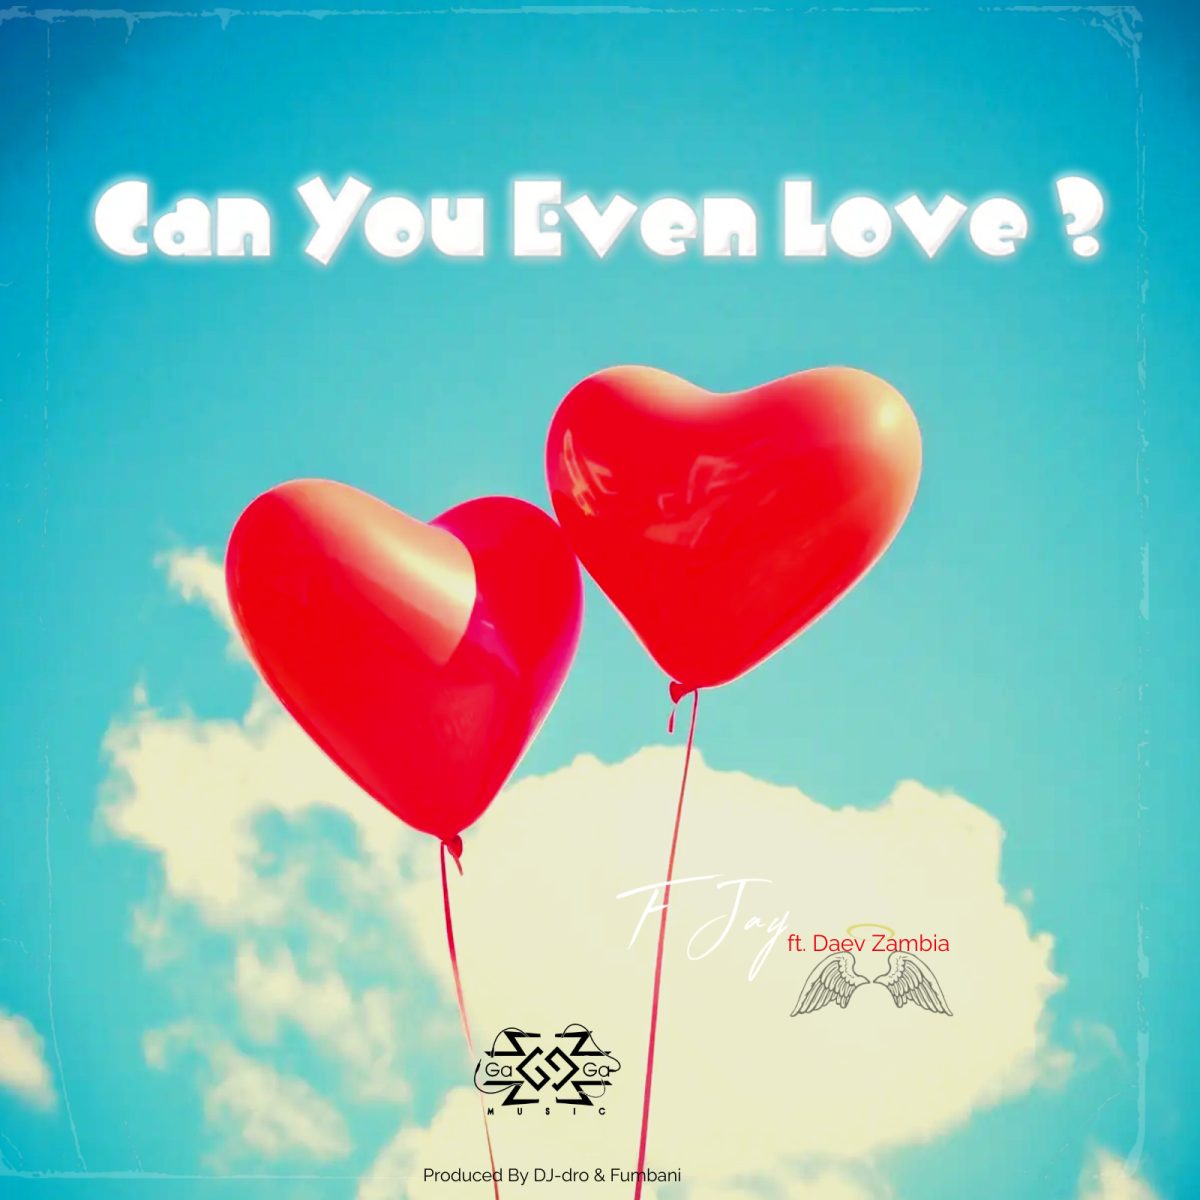 F Jay ft. Daev Zambia - Can You Even Love